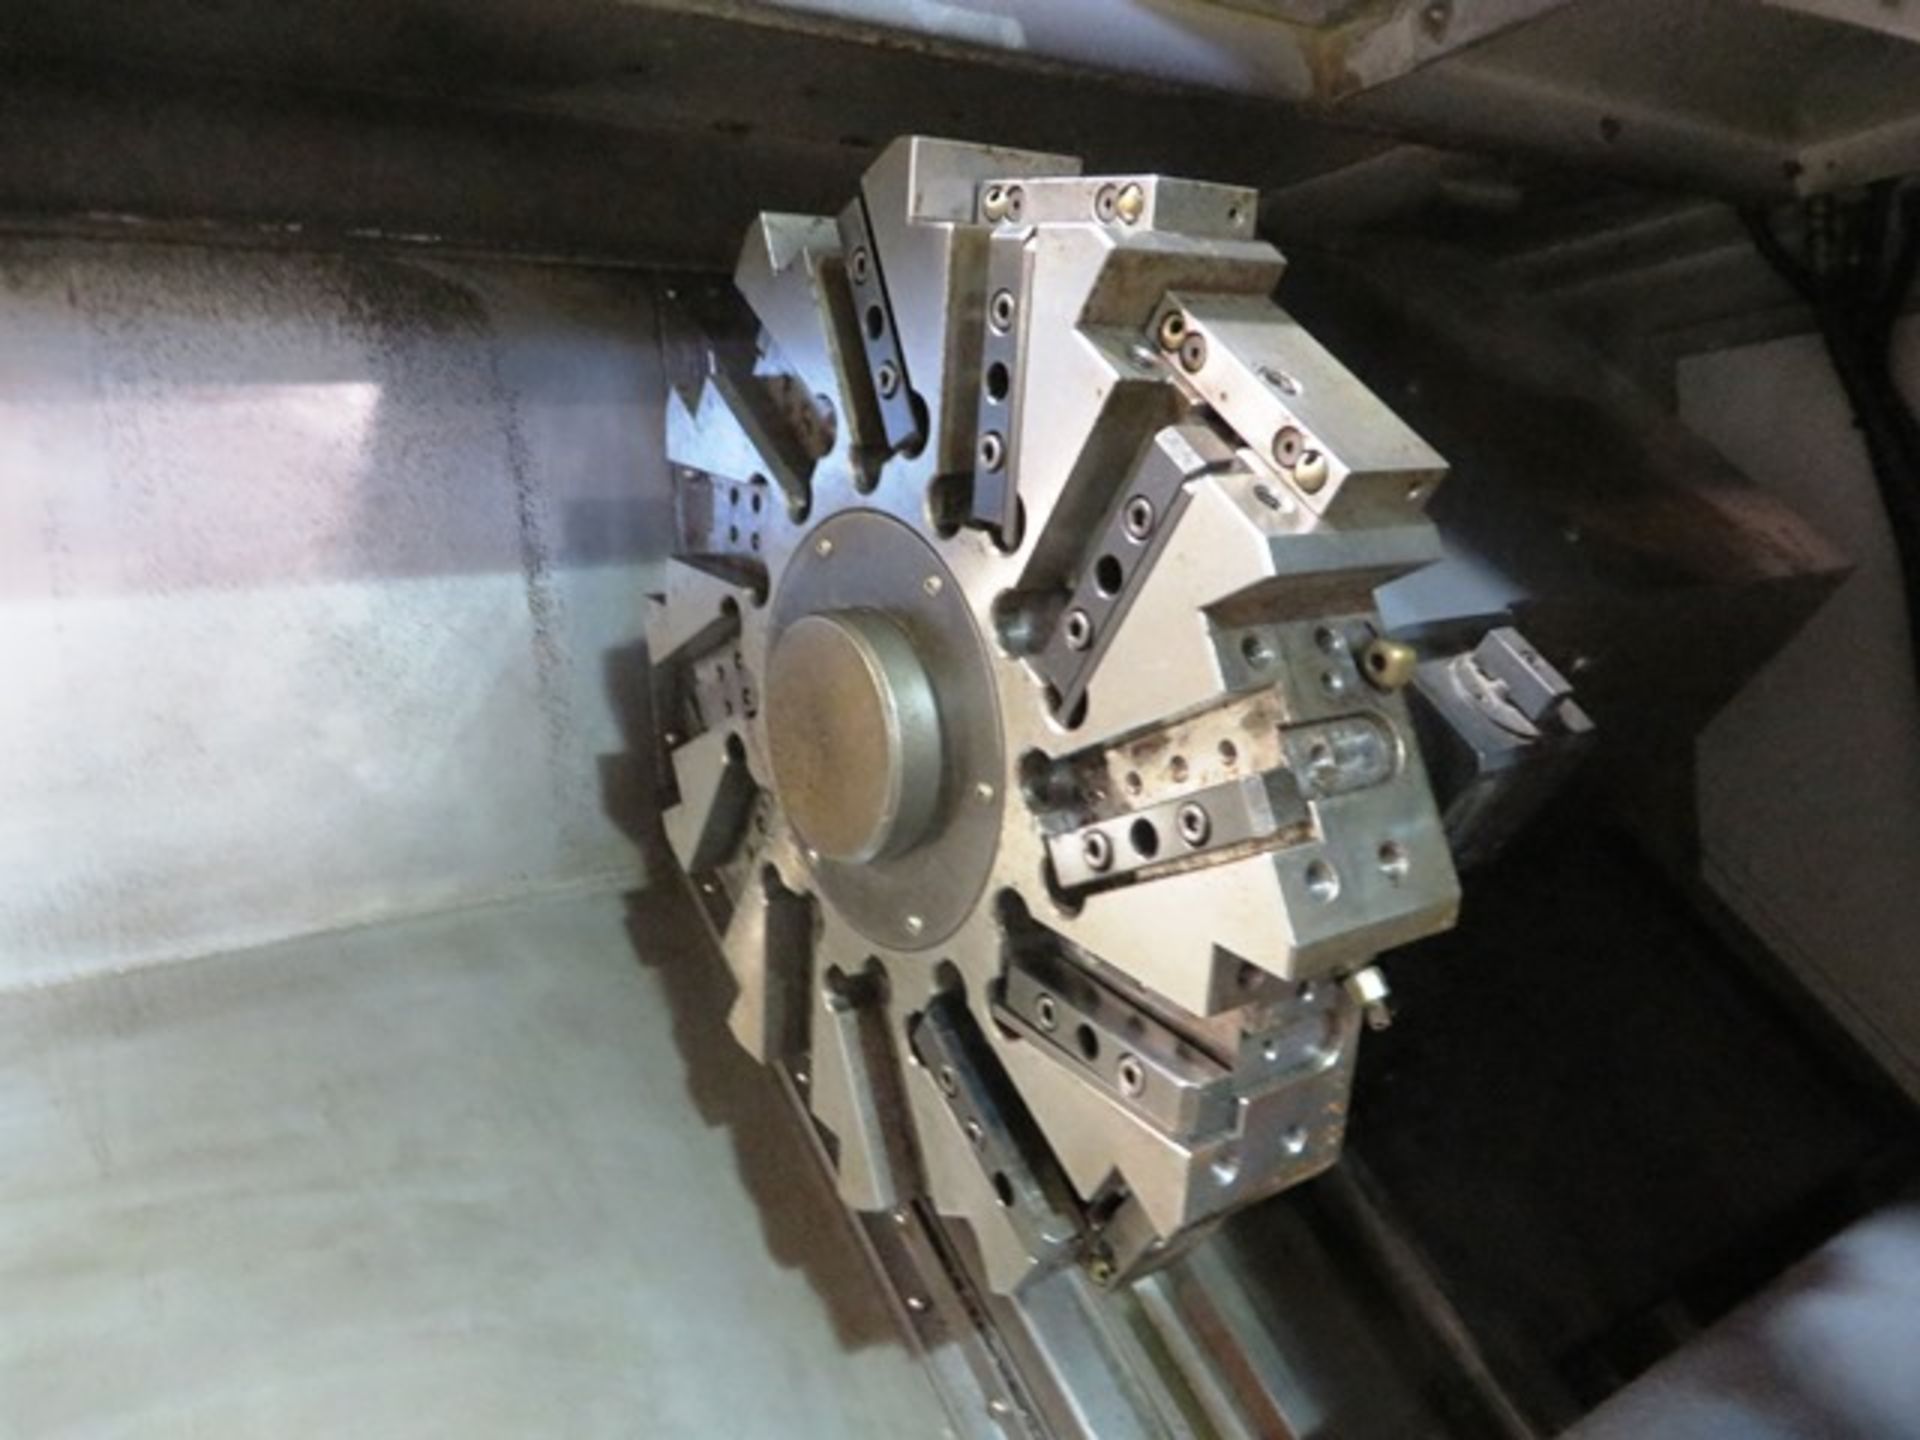 Mighty Viper Model VT25-BL CNC Turning Center with 10" 3-Jaw Power Chuck, 41" Maximum Turning Length - Image 9 of 10